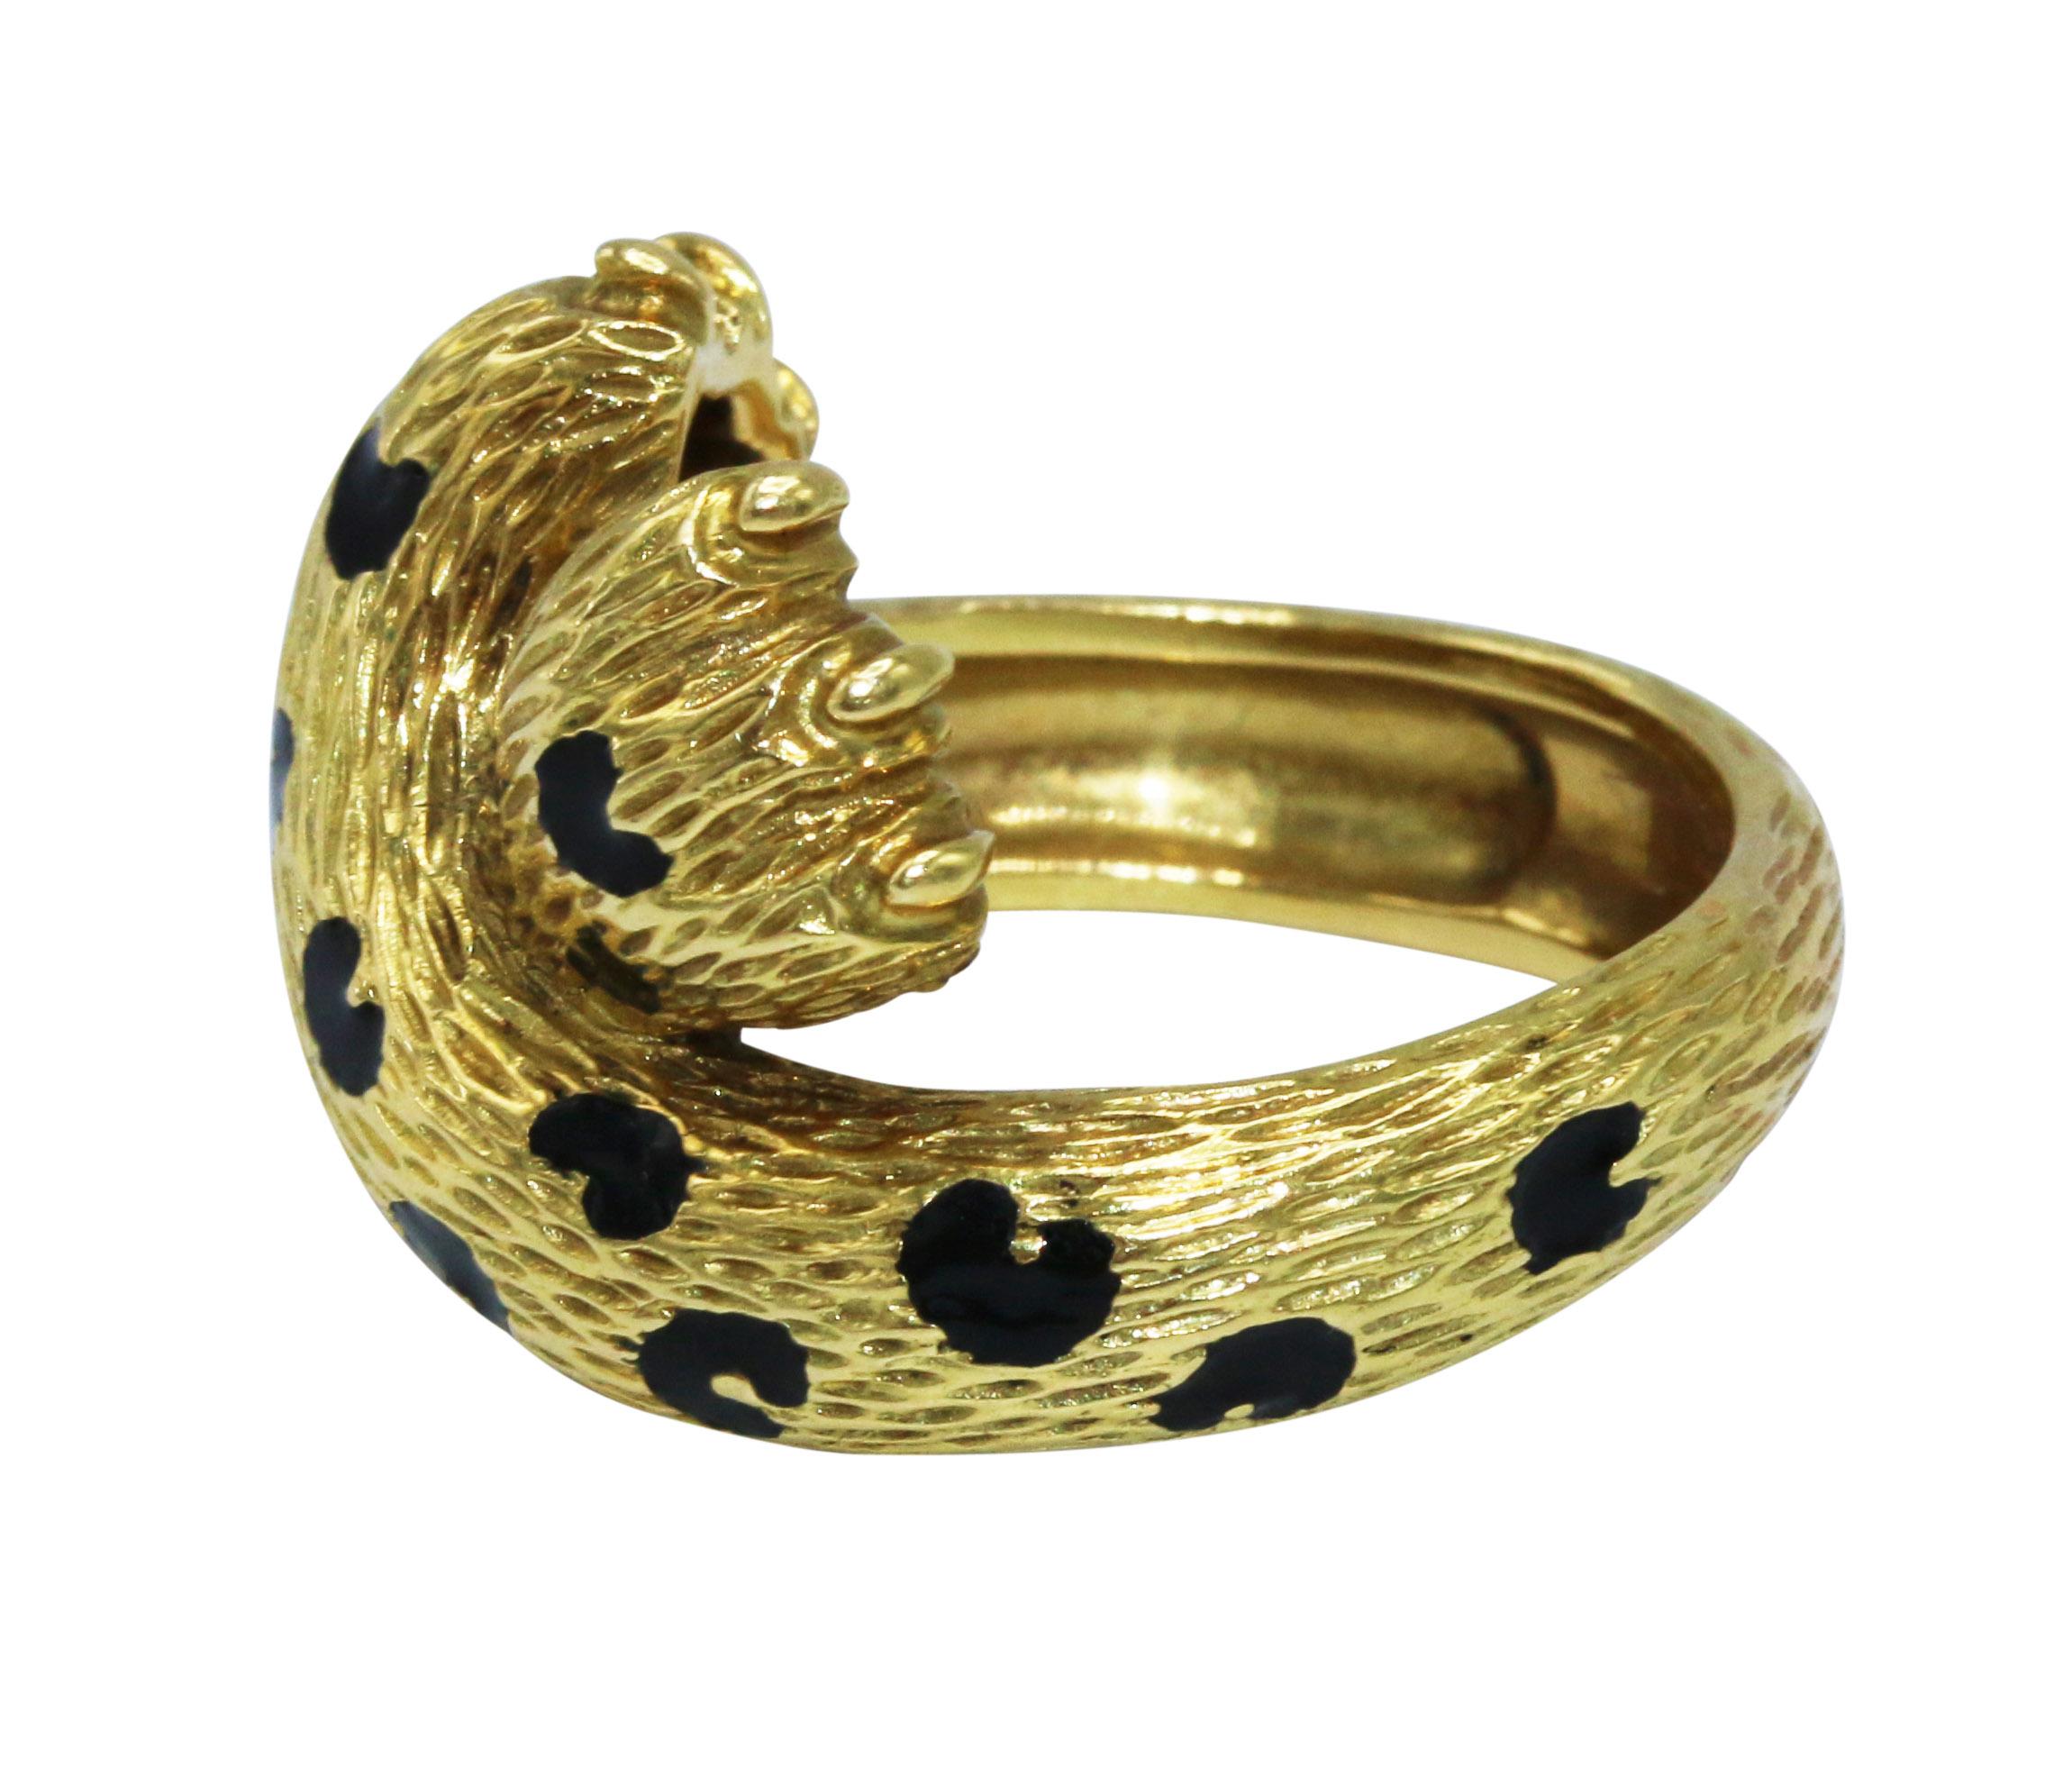 18 karat yellow gold and enamel panther ring by Fred, Paris, designed as two crossed panther paws applied with black enamel spots, gross weight 10.2 grams, size 6, signed Fred France, with French assay and workshop marks.
The ring is incredibly well